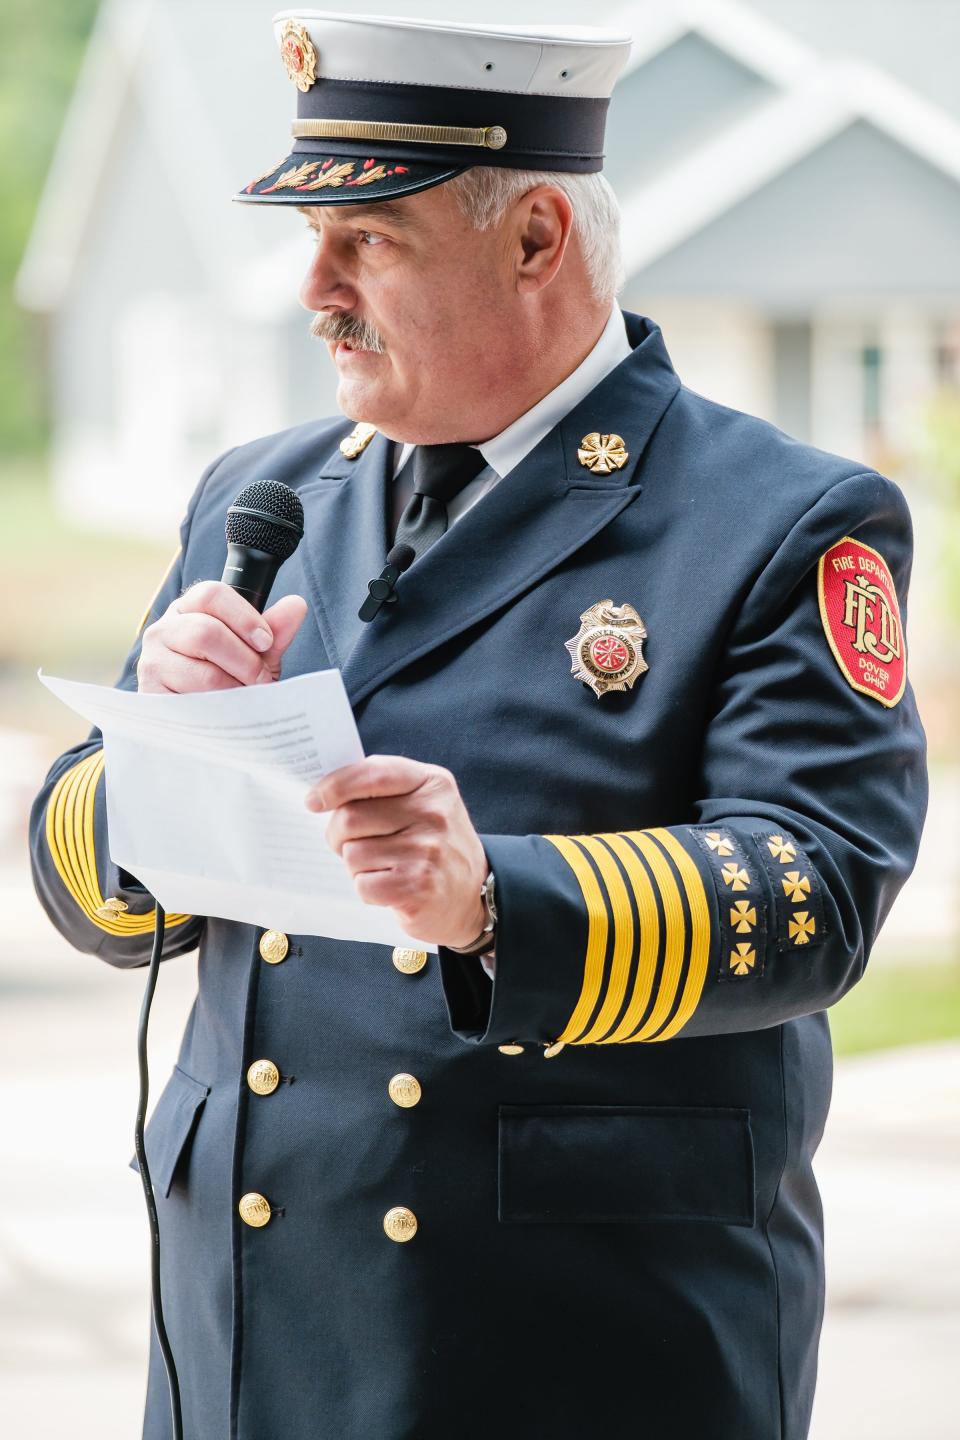 Chief Russ Volkert gives remarks during the celebration of the Dover Fire Department's 150th year of operation, Sunday, May 21 at the Dover Fire Department’s north station.